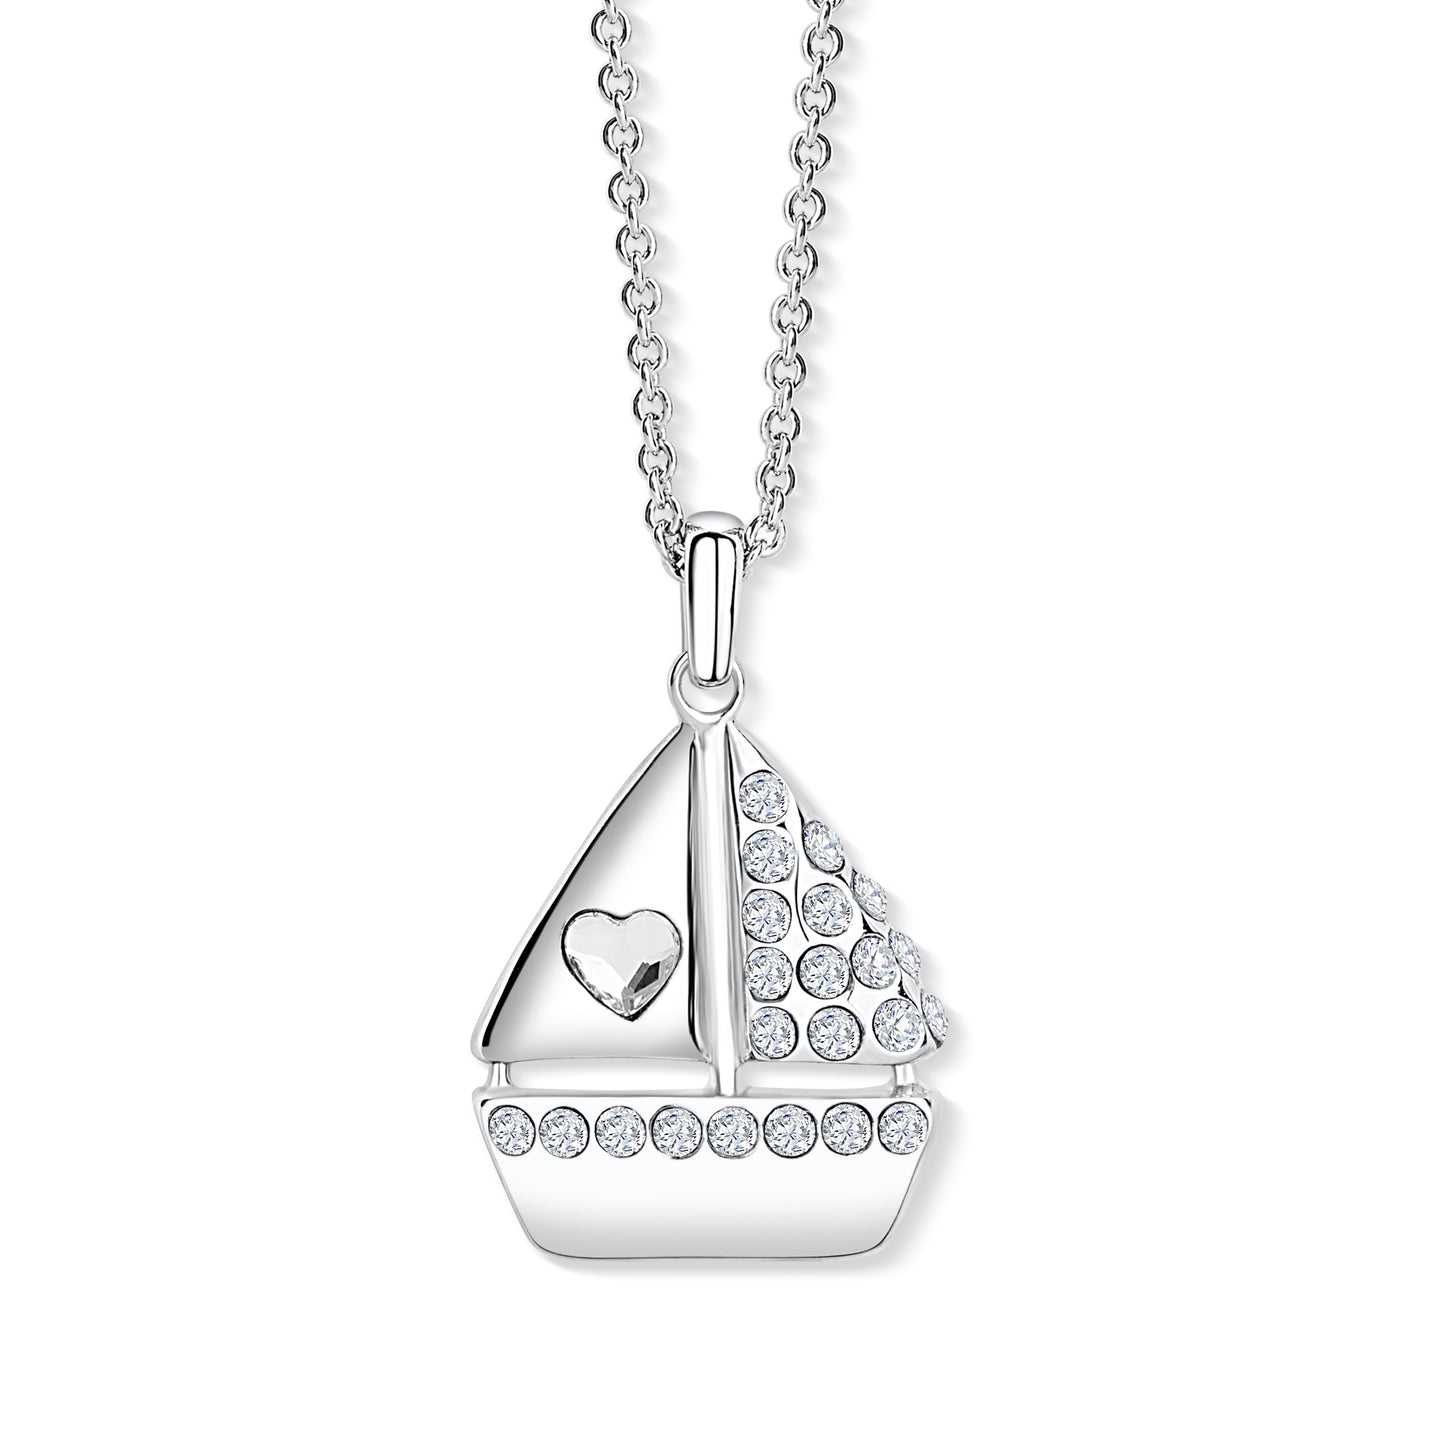 Sailing boat Pendant with Clear Crystals